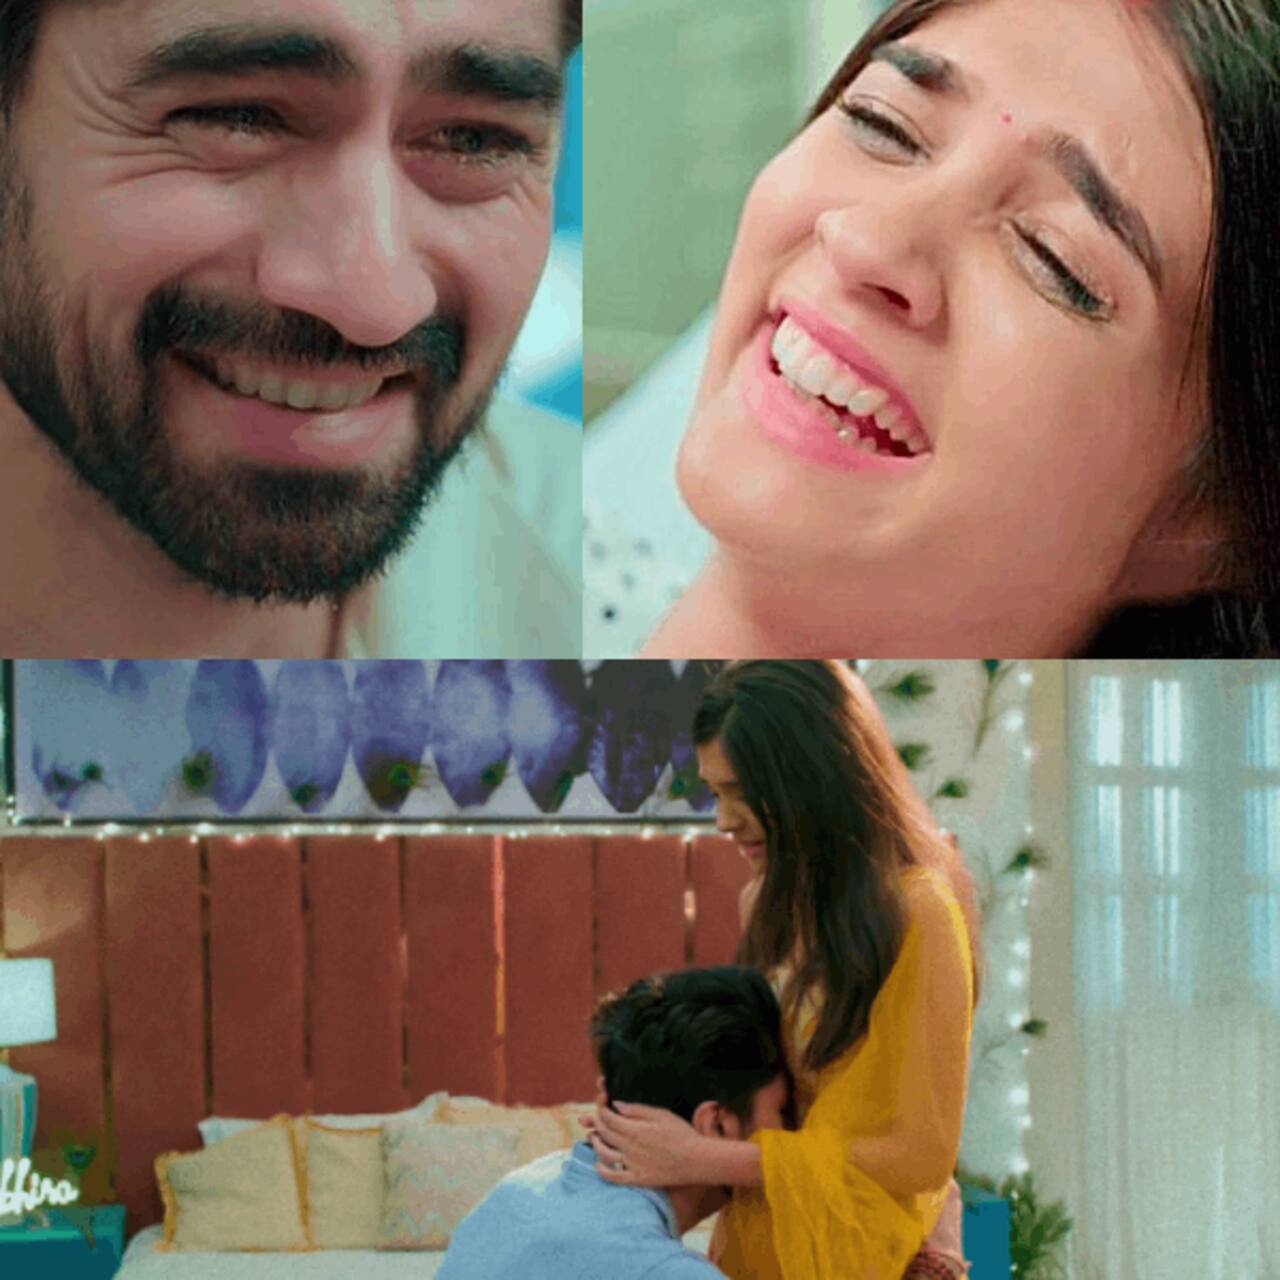 Yeh Rishta Kya Kehlata Hai twist: Fans overjoyed as Abhi-Akshu are expecting twins; 'ABHIRA TOGETHER FOREVER' makes it to top trends [VIEW TWEETS]